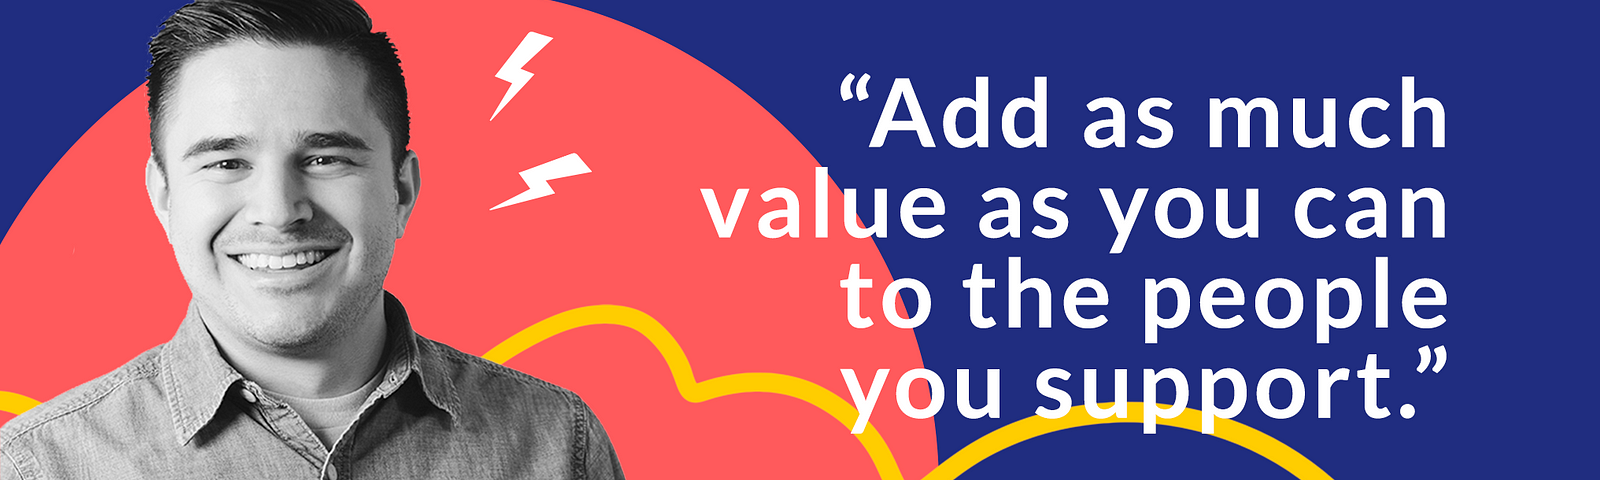 Zac smiling in front of a colorful background with the quote: “Add as much value as you can to the people you support.”